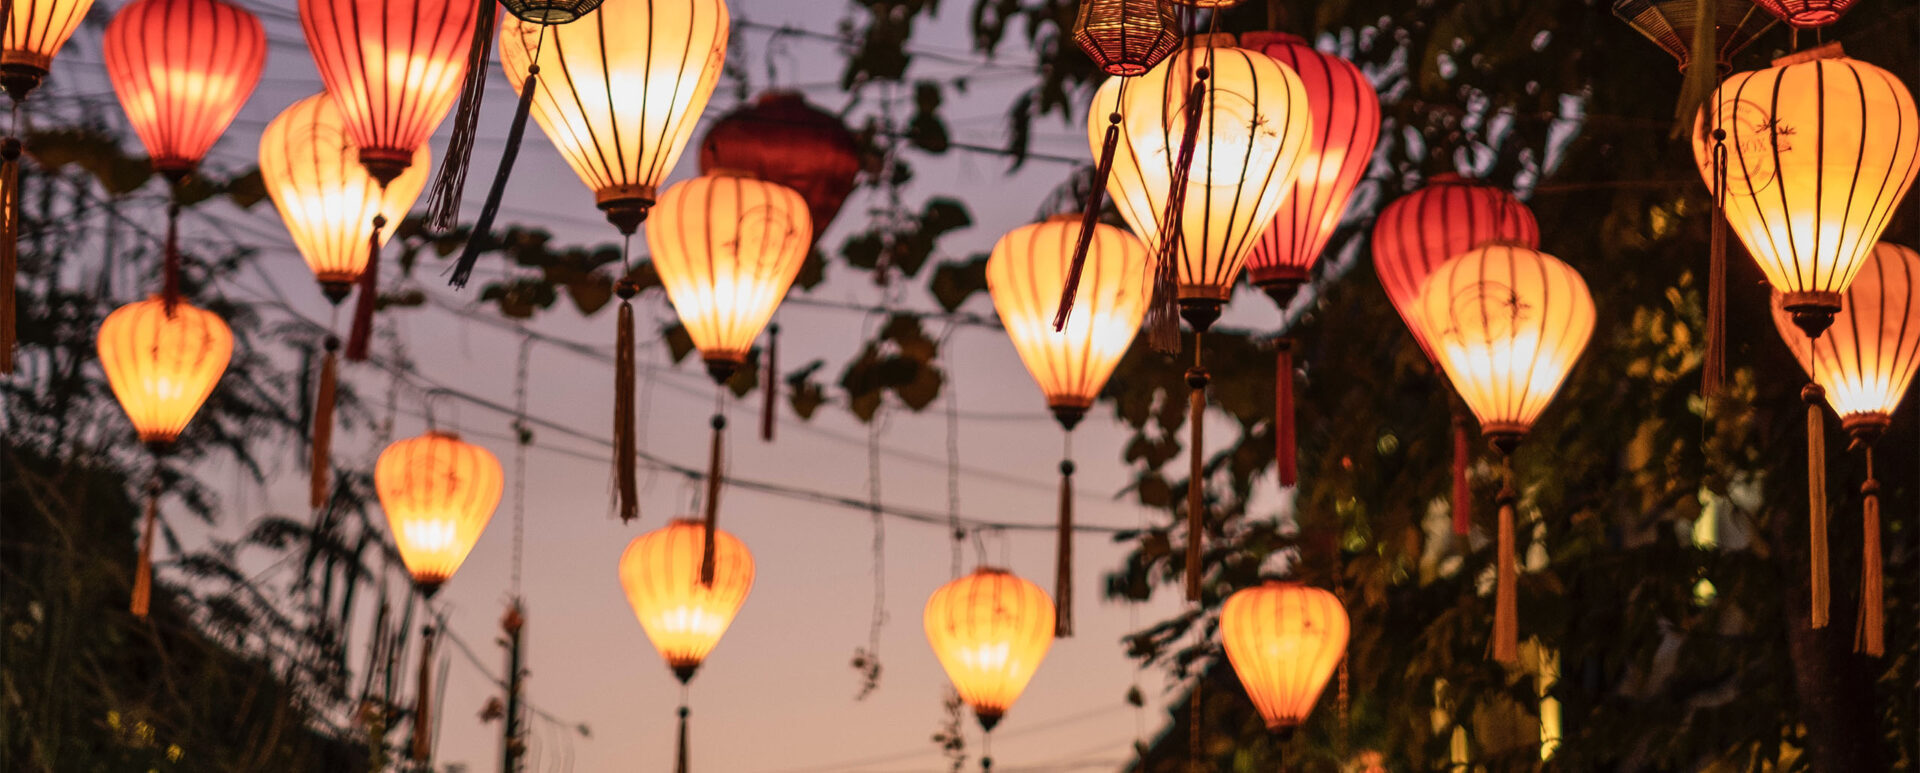 Guide to Hoi An